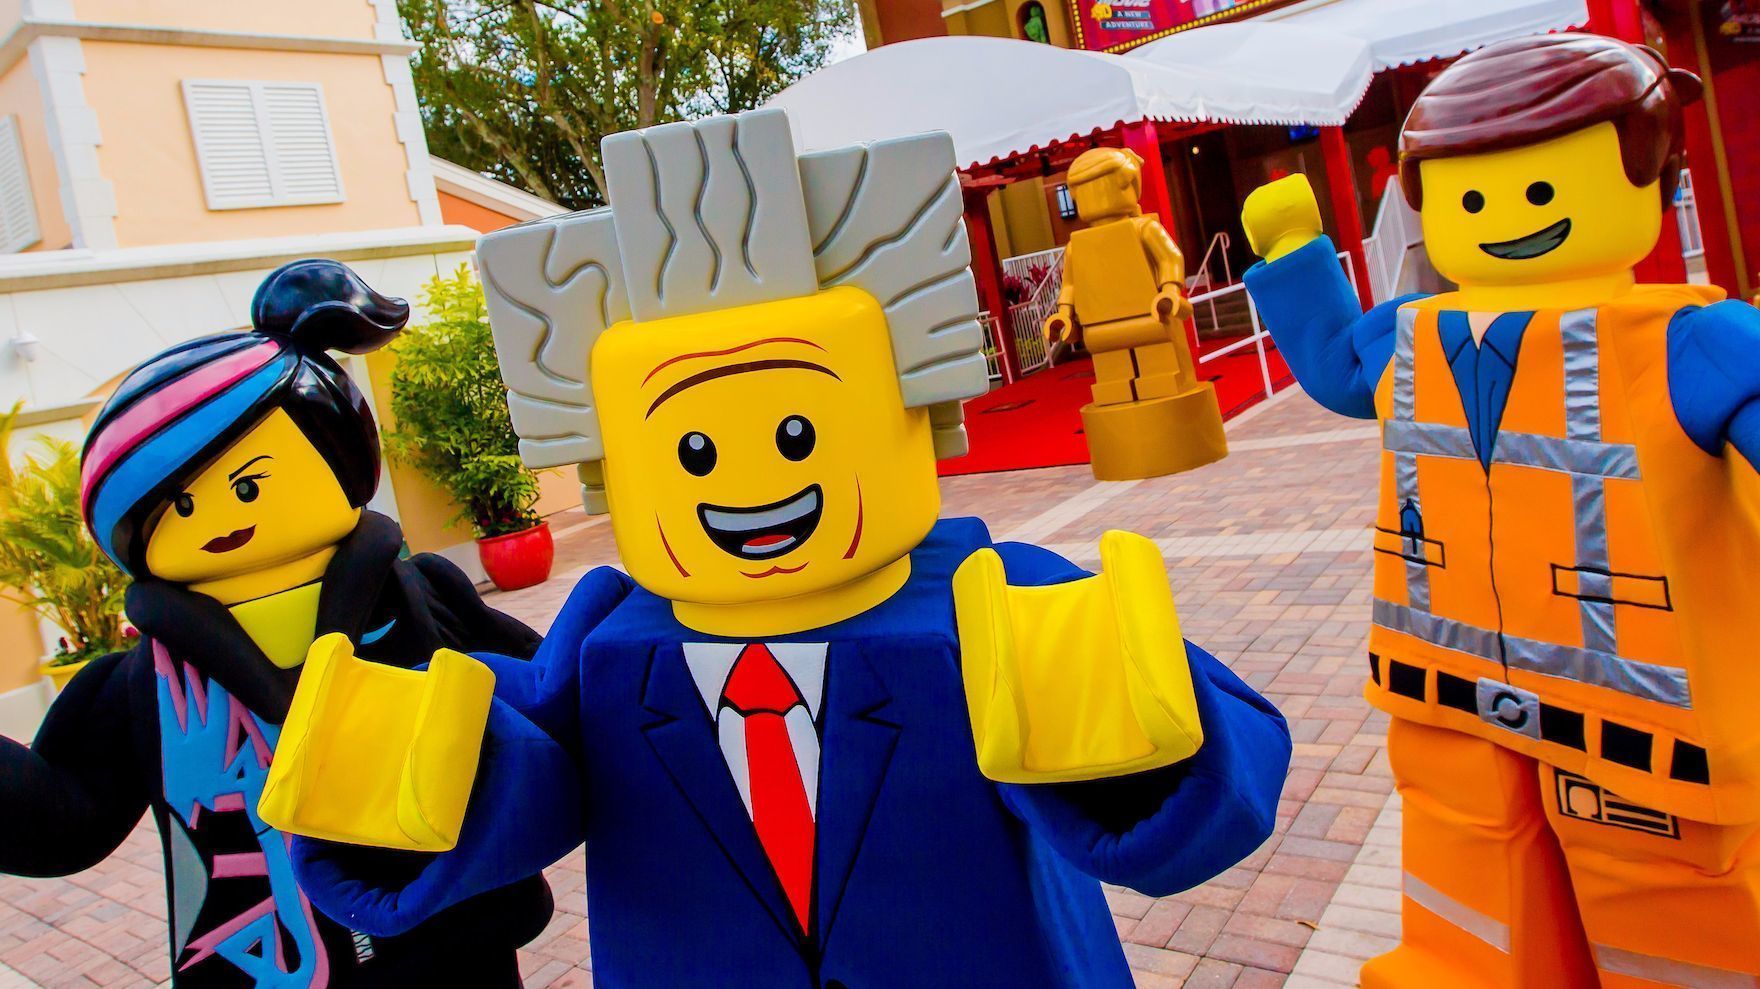 Legoland: $99 sale on Awesomer Annual Pass coming up ...